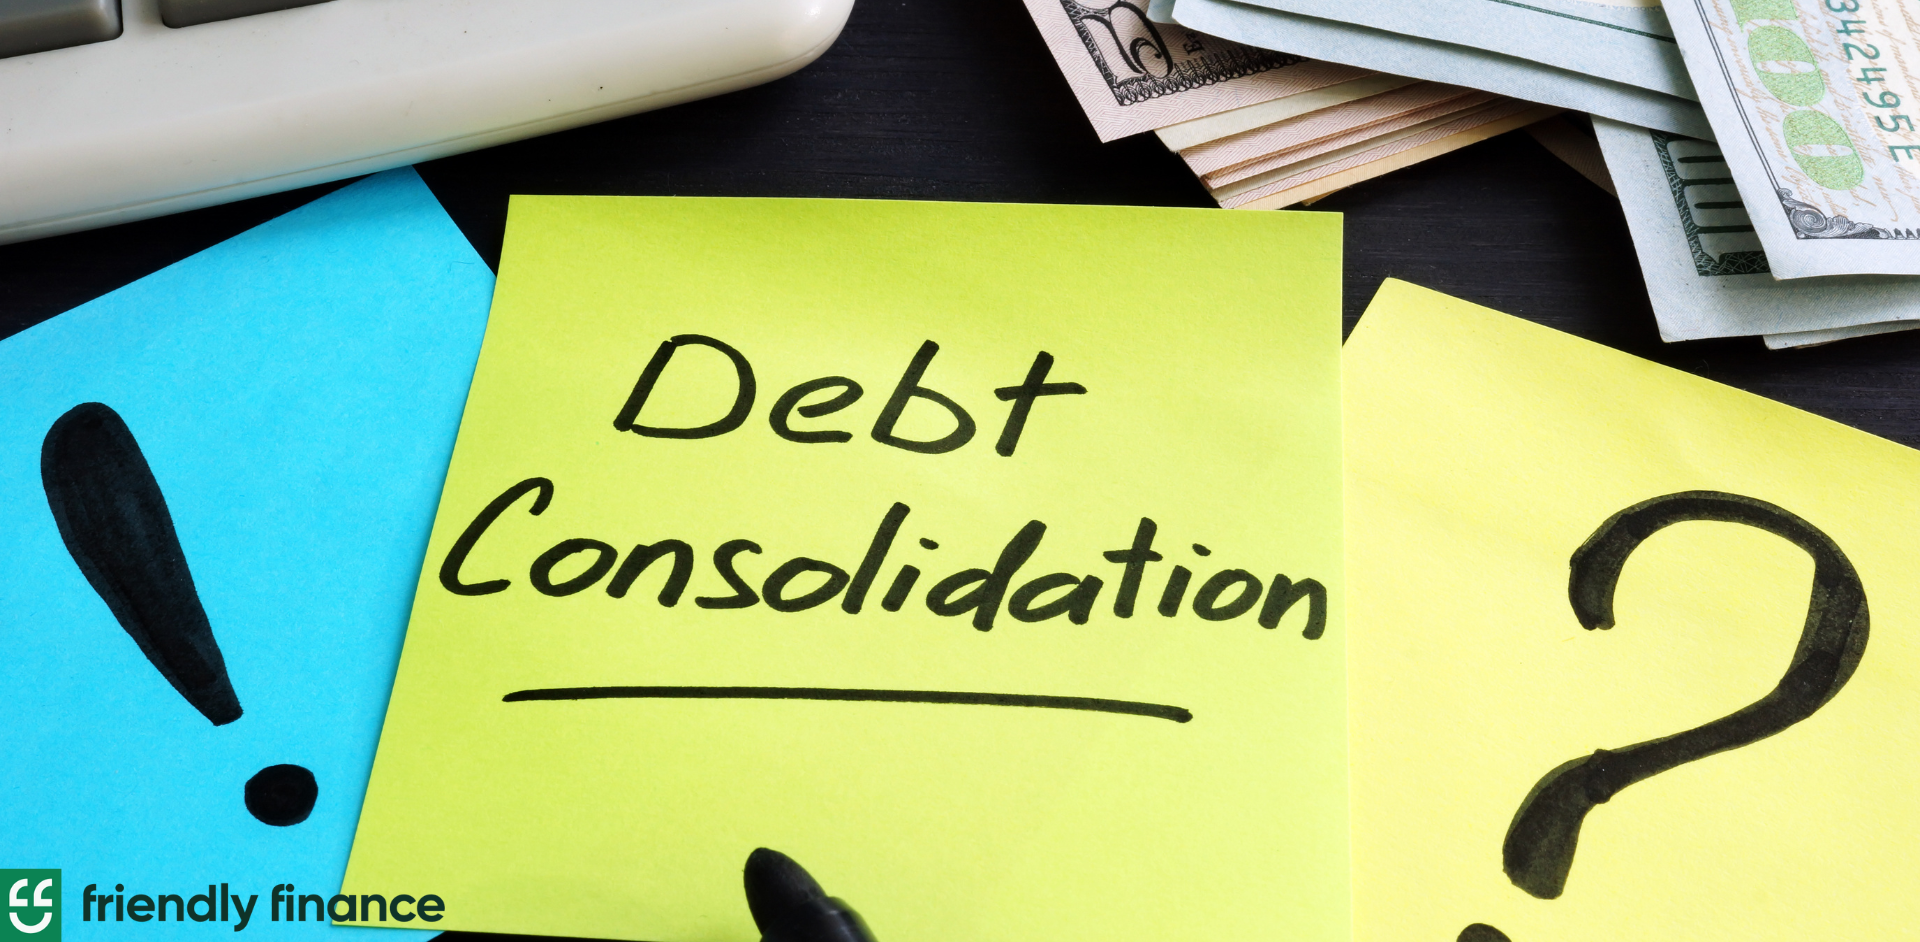 post its with the word "debt consolidation" written on the middle